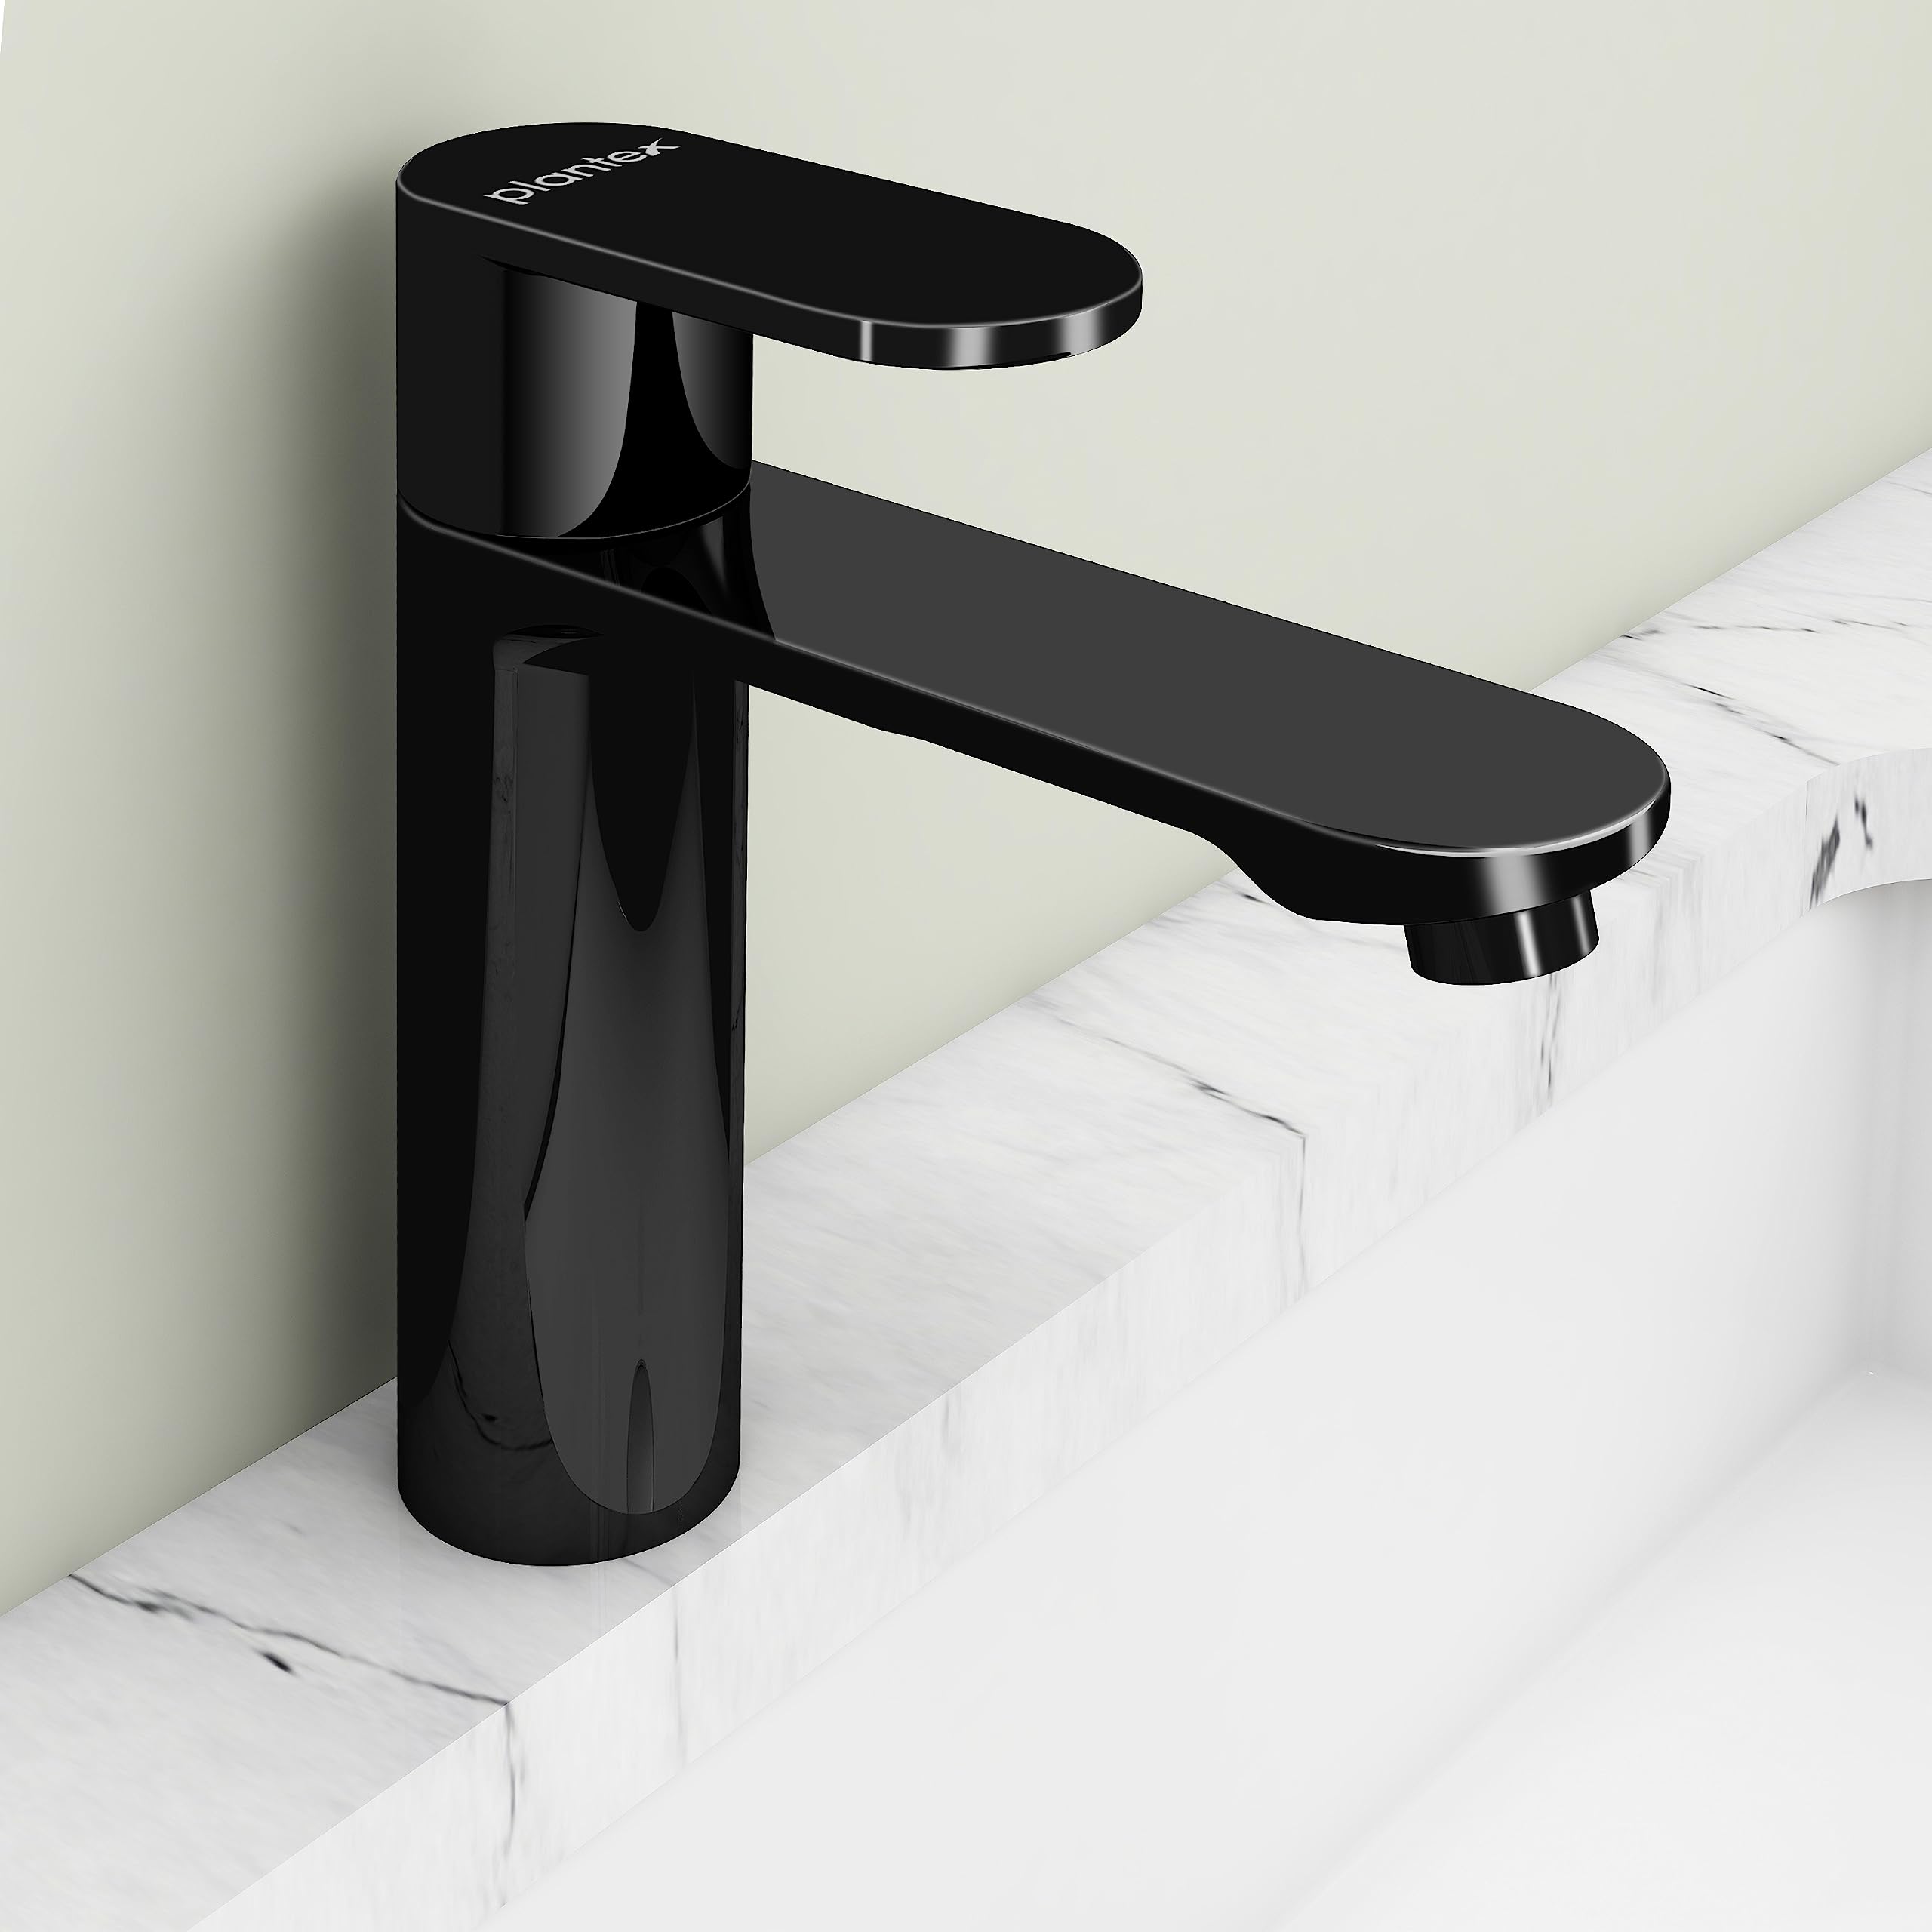 Plantex Pure Brass ORN-203 Single Lever Pillar Cock/Table Top Wash Basin Tap/Water Faucet for Kitchen Sink with Teflon Tape - (Black Glossy Finish)